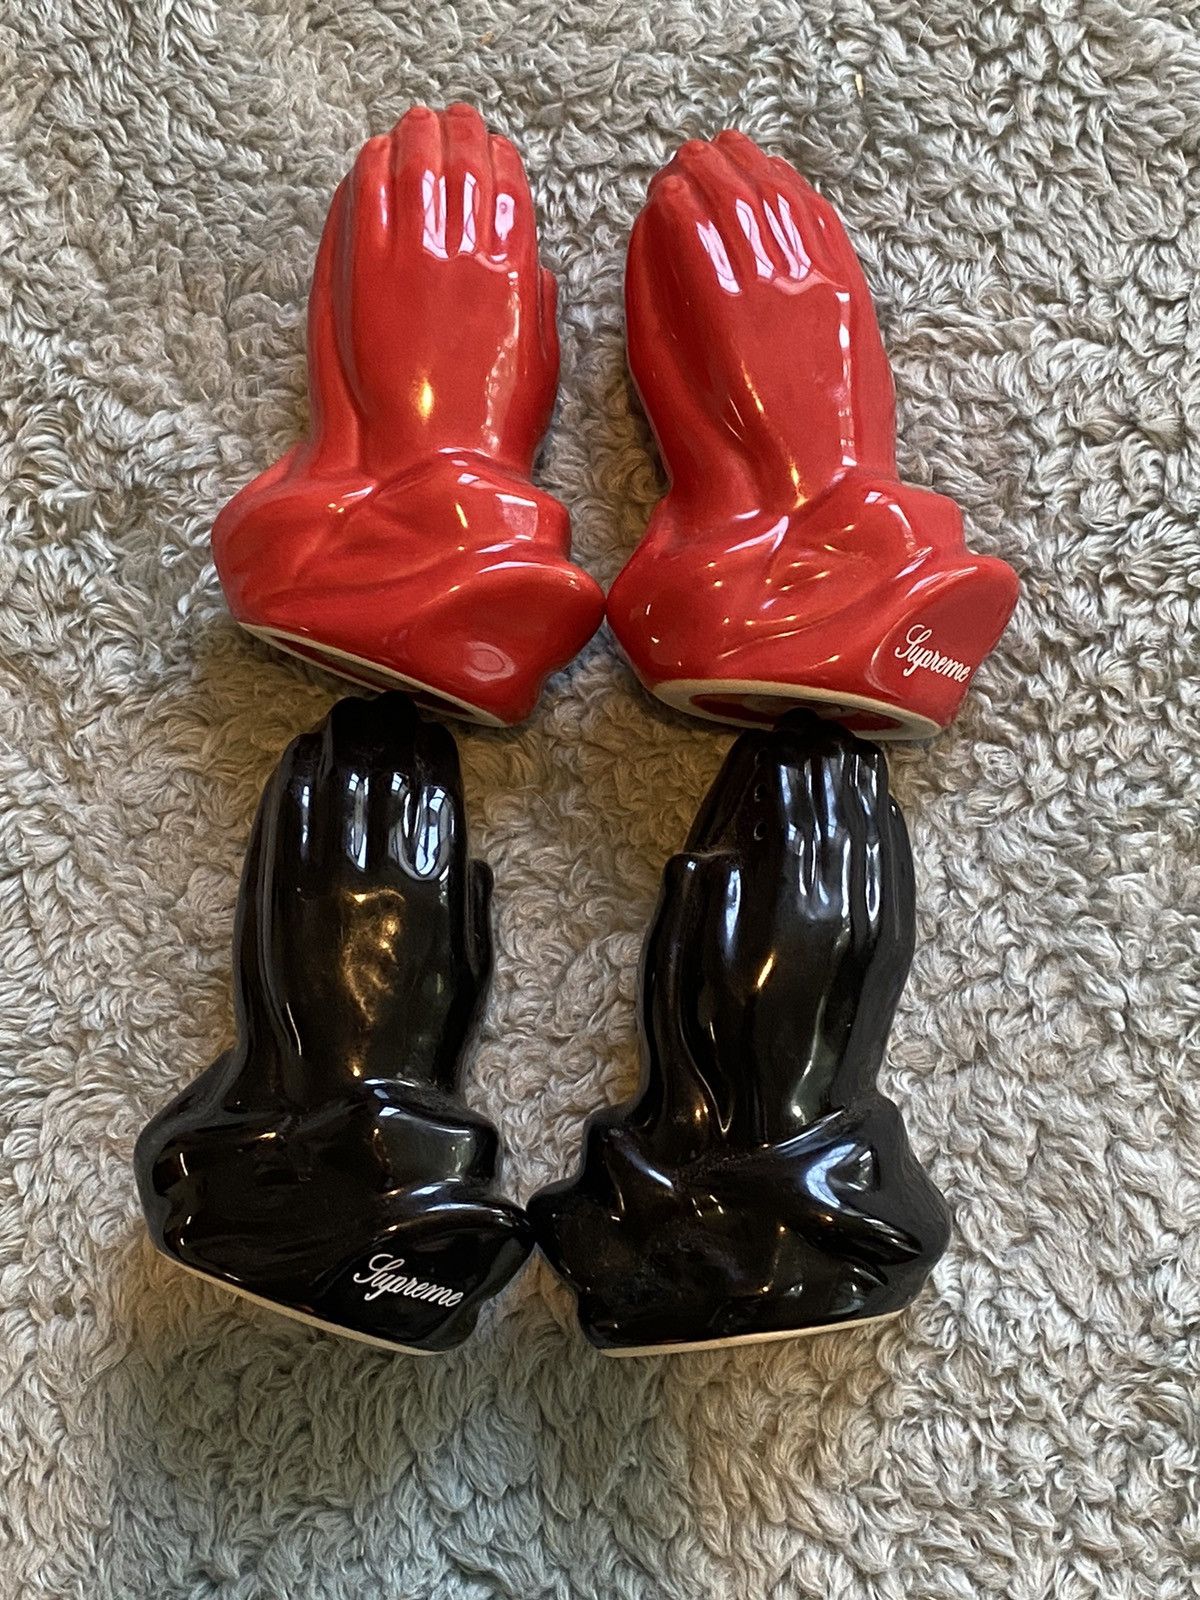 Pre-owned Supreme Praying Hands Salt And Pepper Shaker Ss13 Authentic In Red